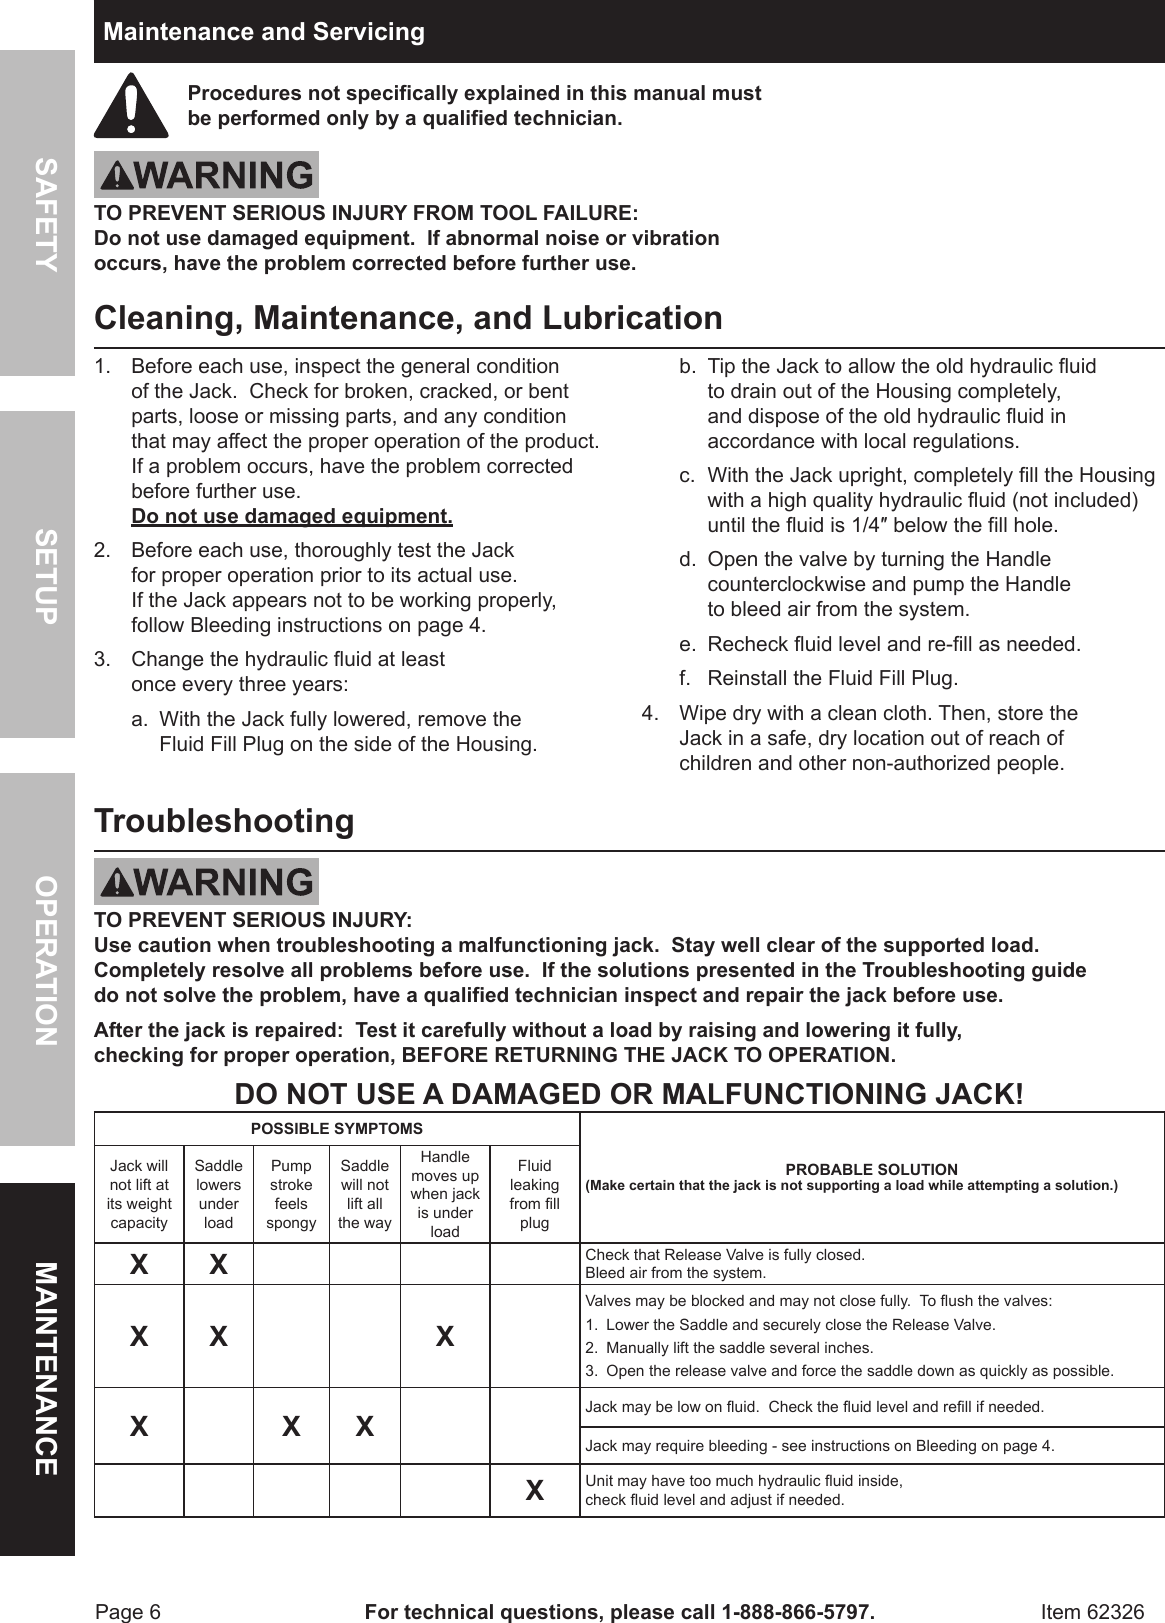 Page 6 of 8 - Manual For The 62326 3 Ton Low Profile Steel Heavy Duty Floor Jack With Rapid Pump®